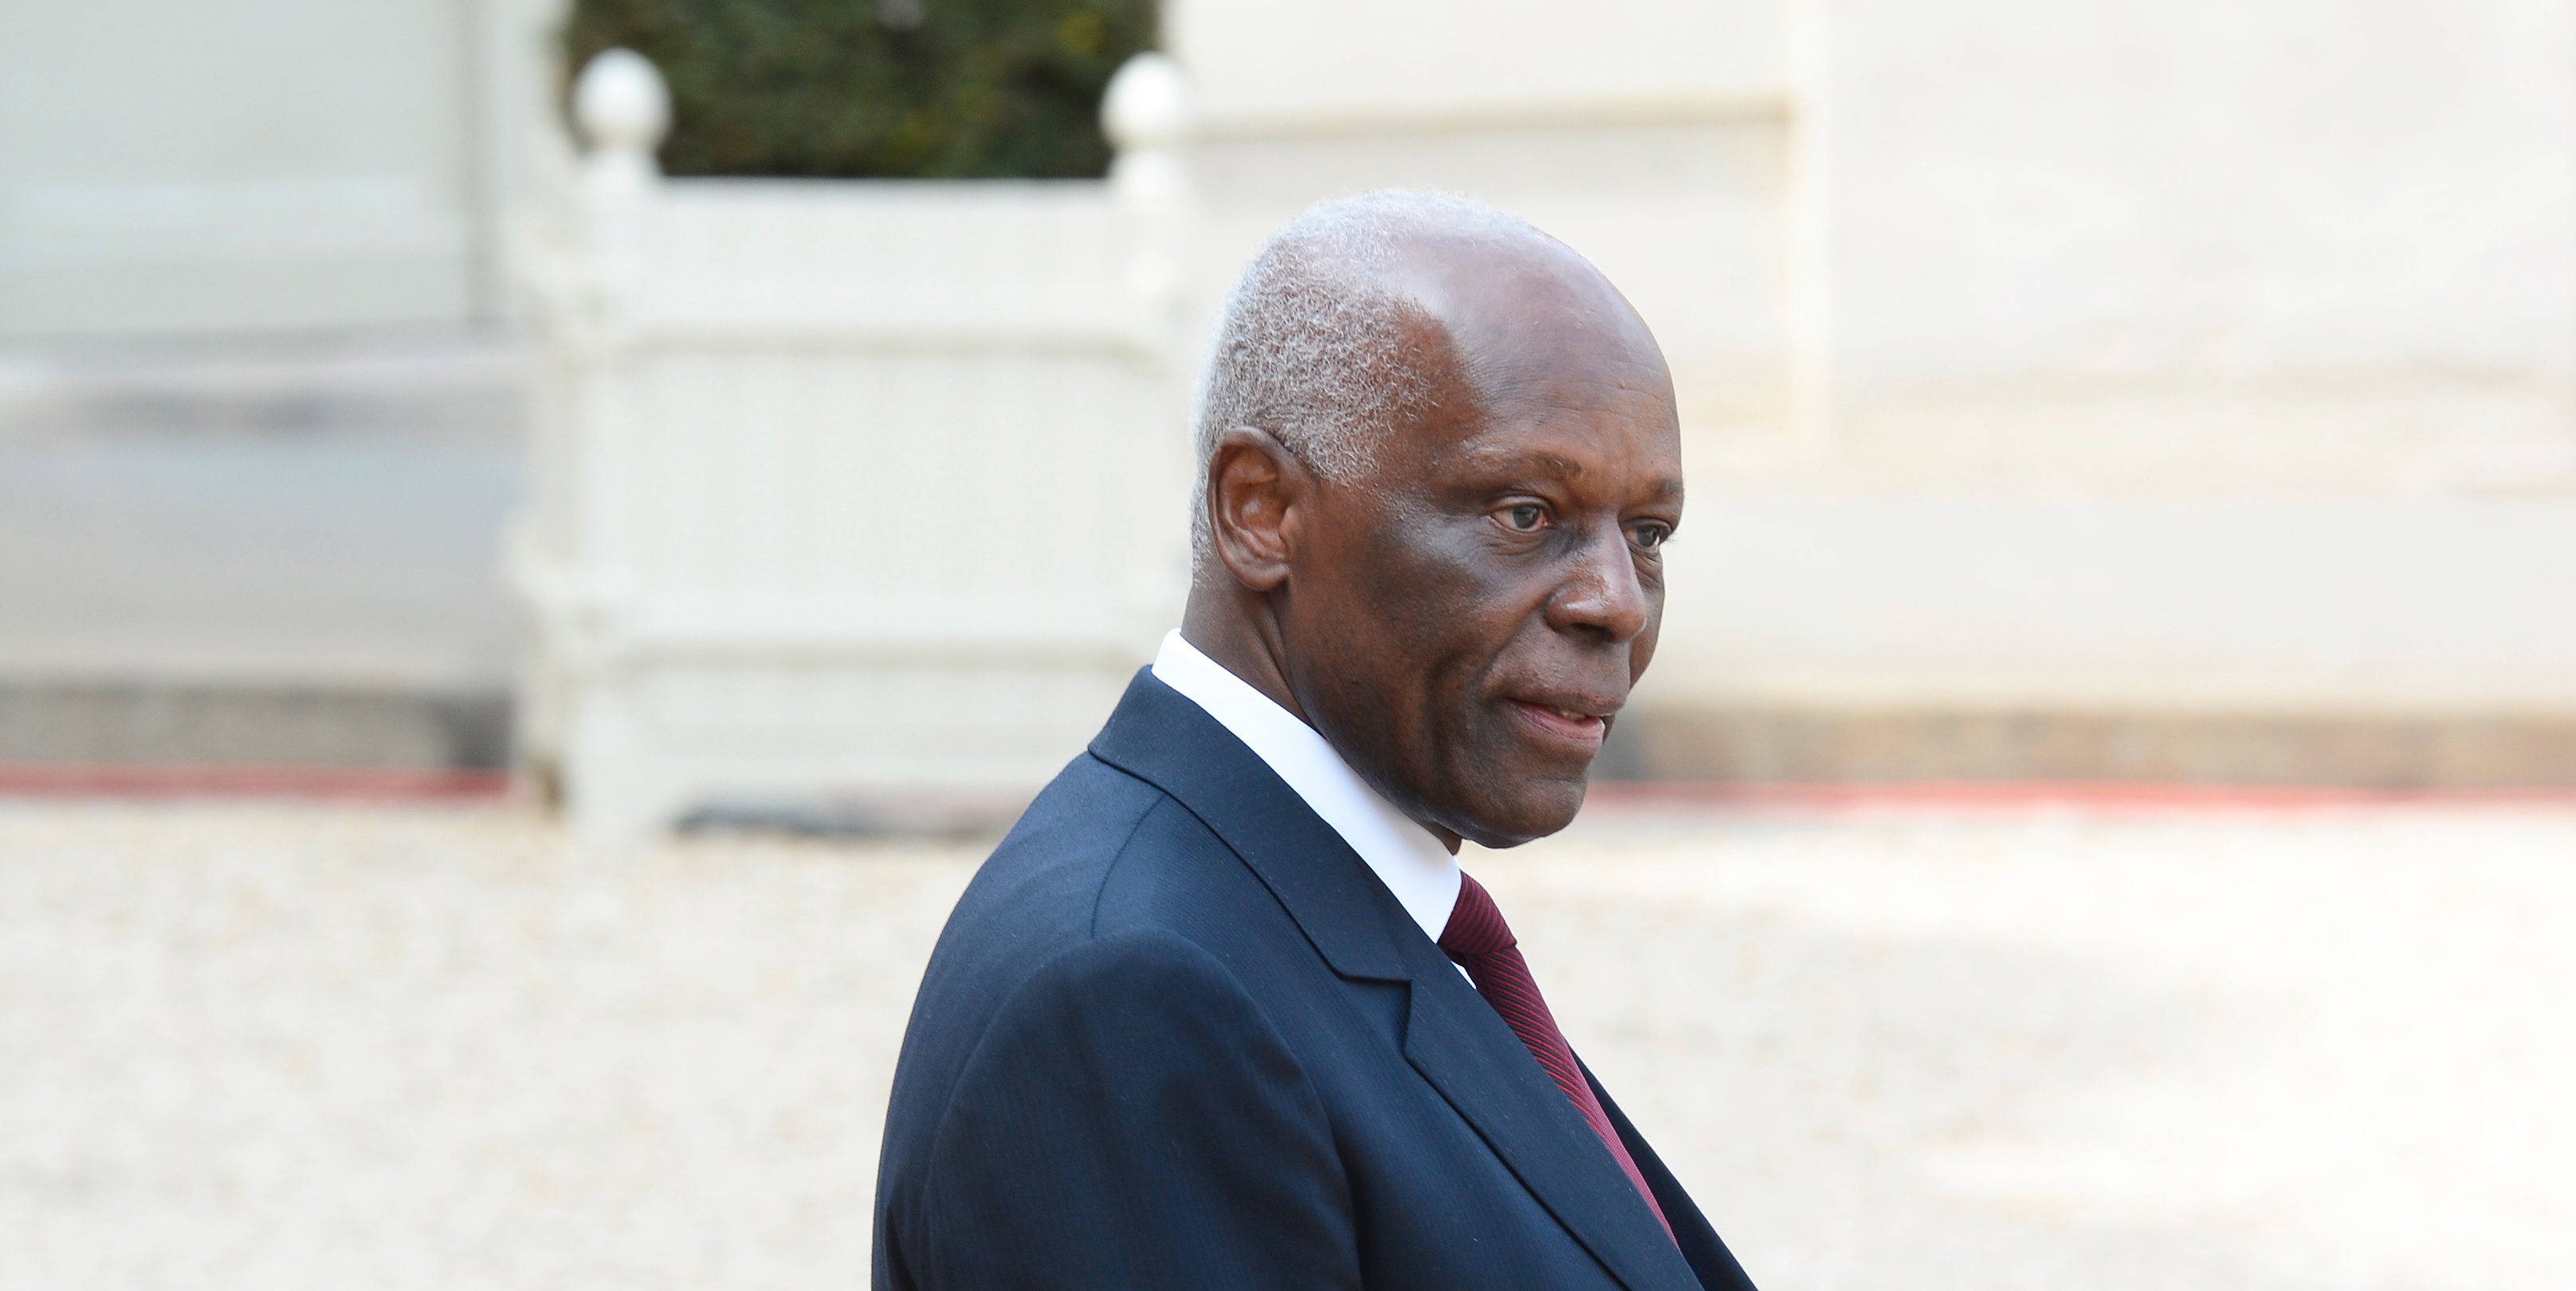 Angola President meets with President Hollande